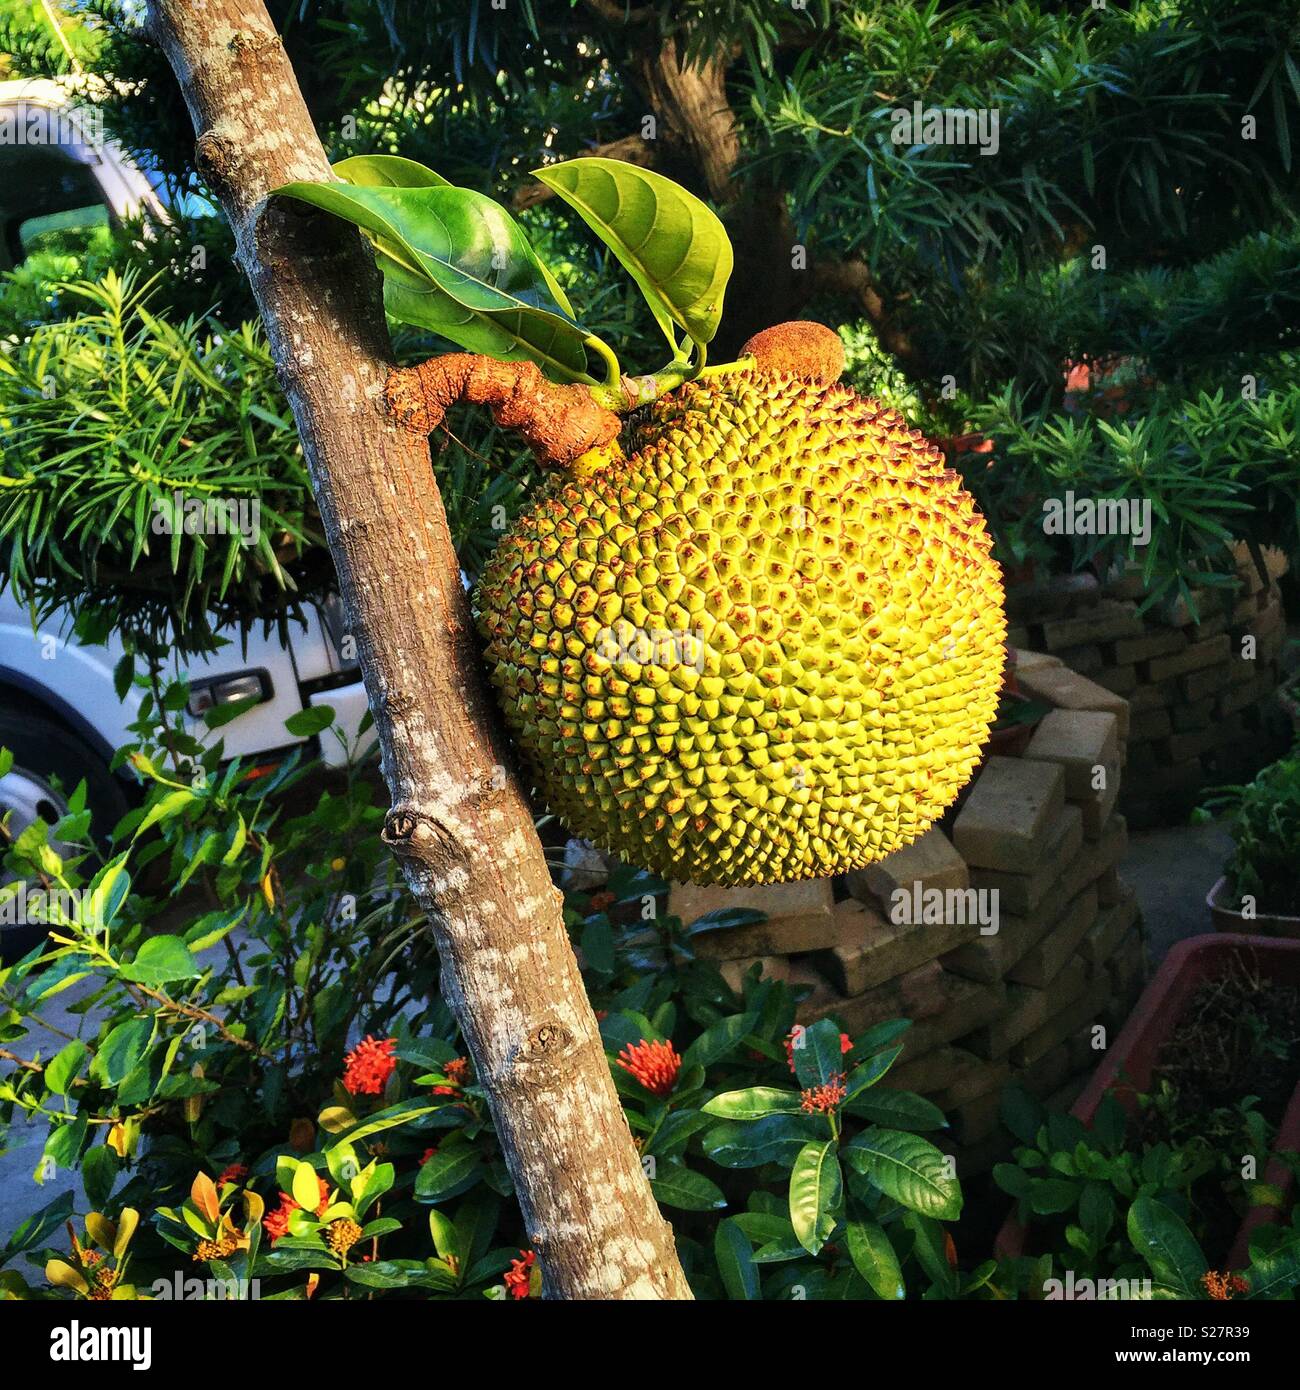 A young jackfruit tree growing in a nursery in the New Territories, Hong Kong Stock Photo